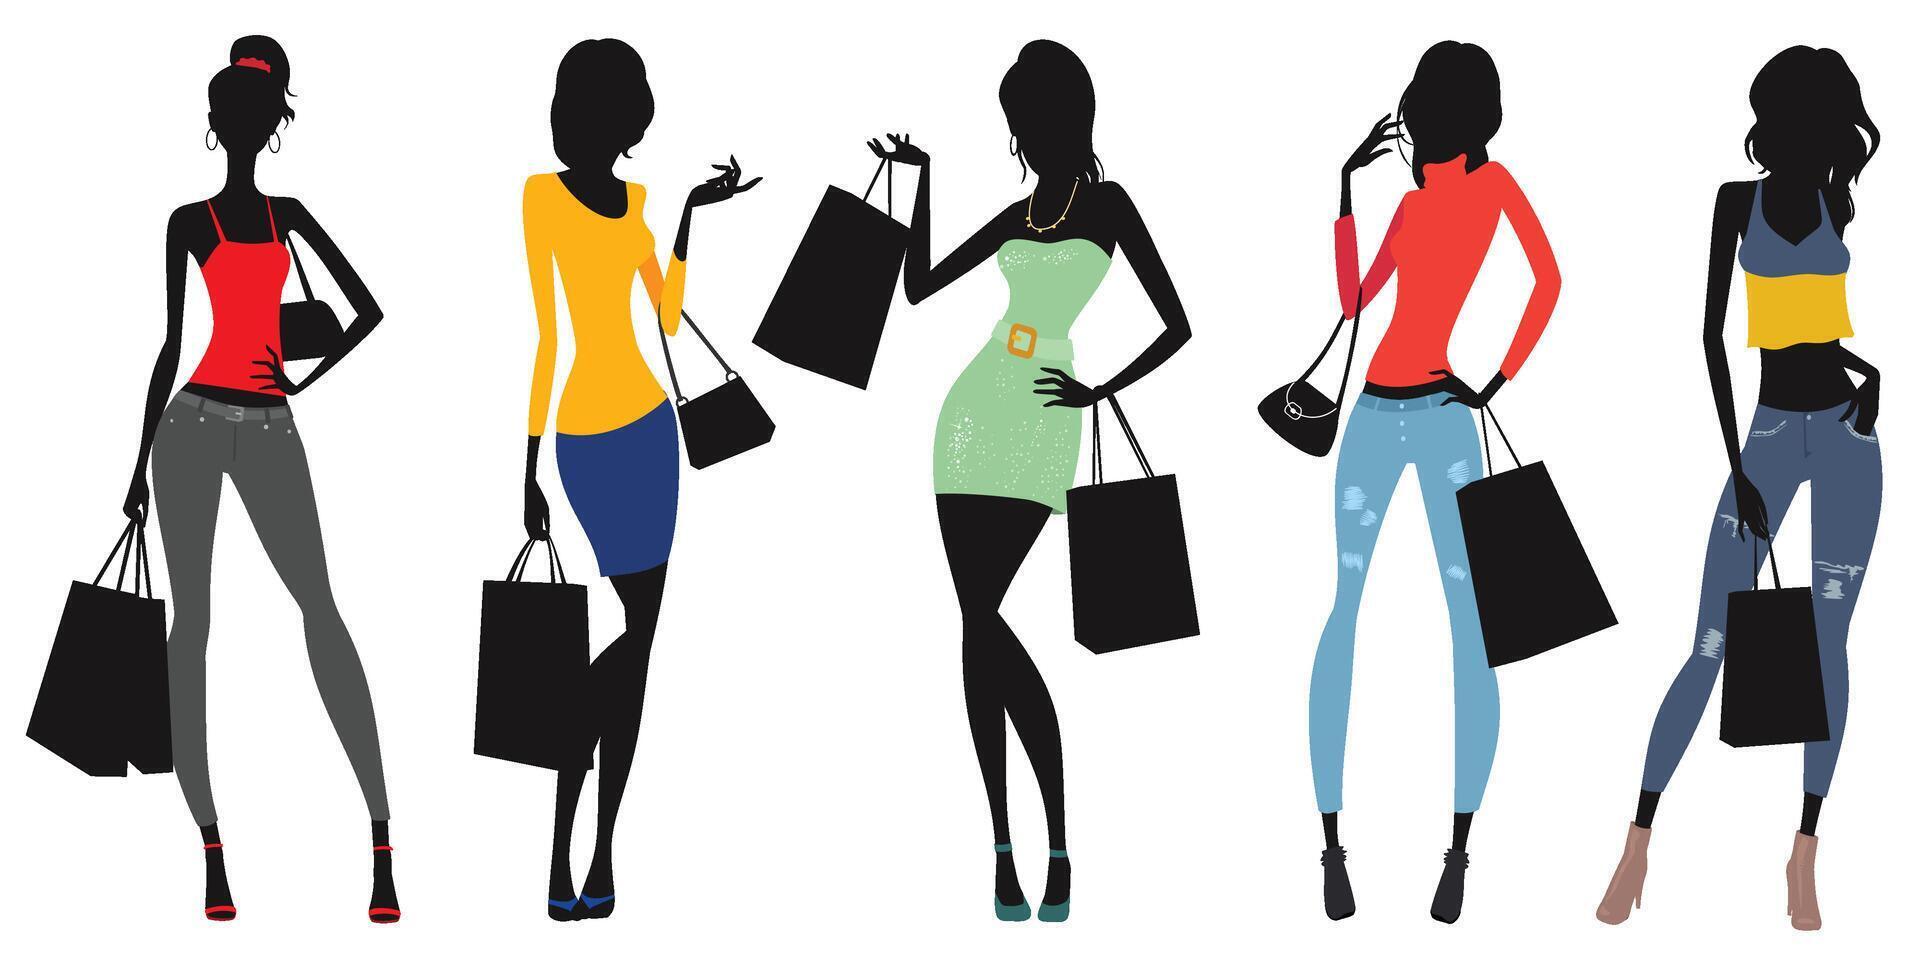 Group of Female Friends Holding Shopping Bags in Their Hands vector